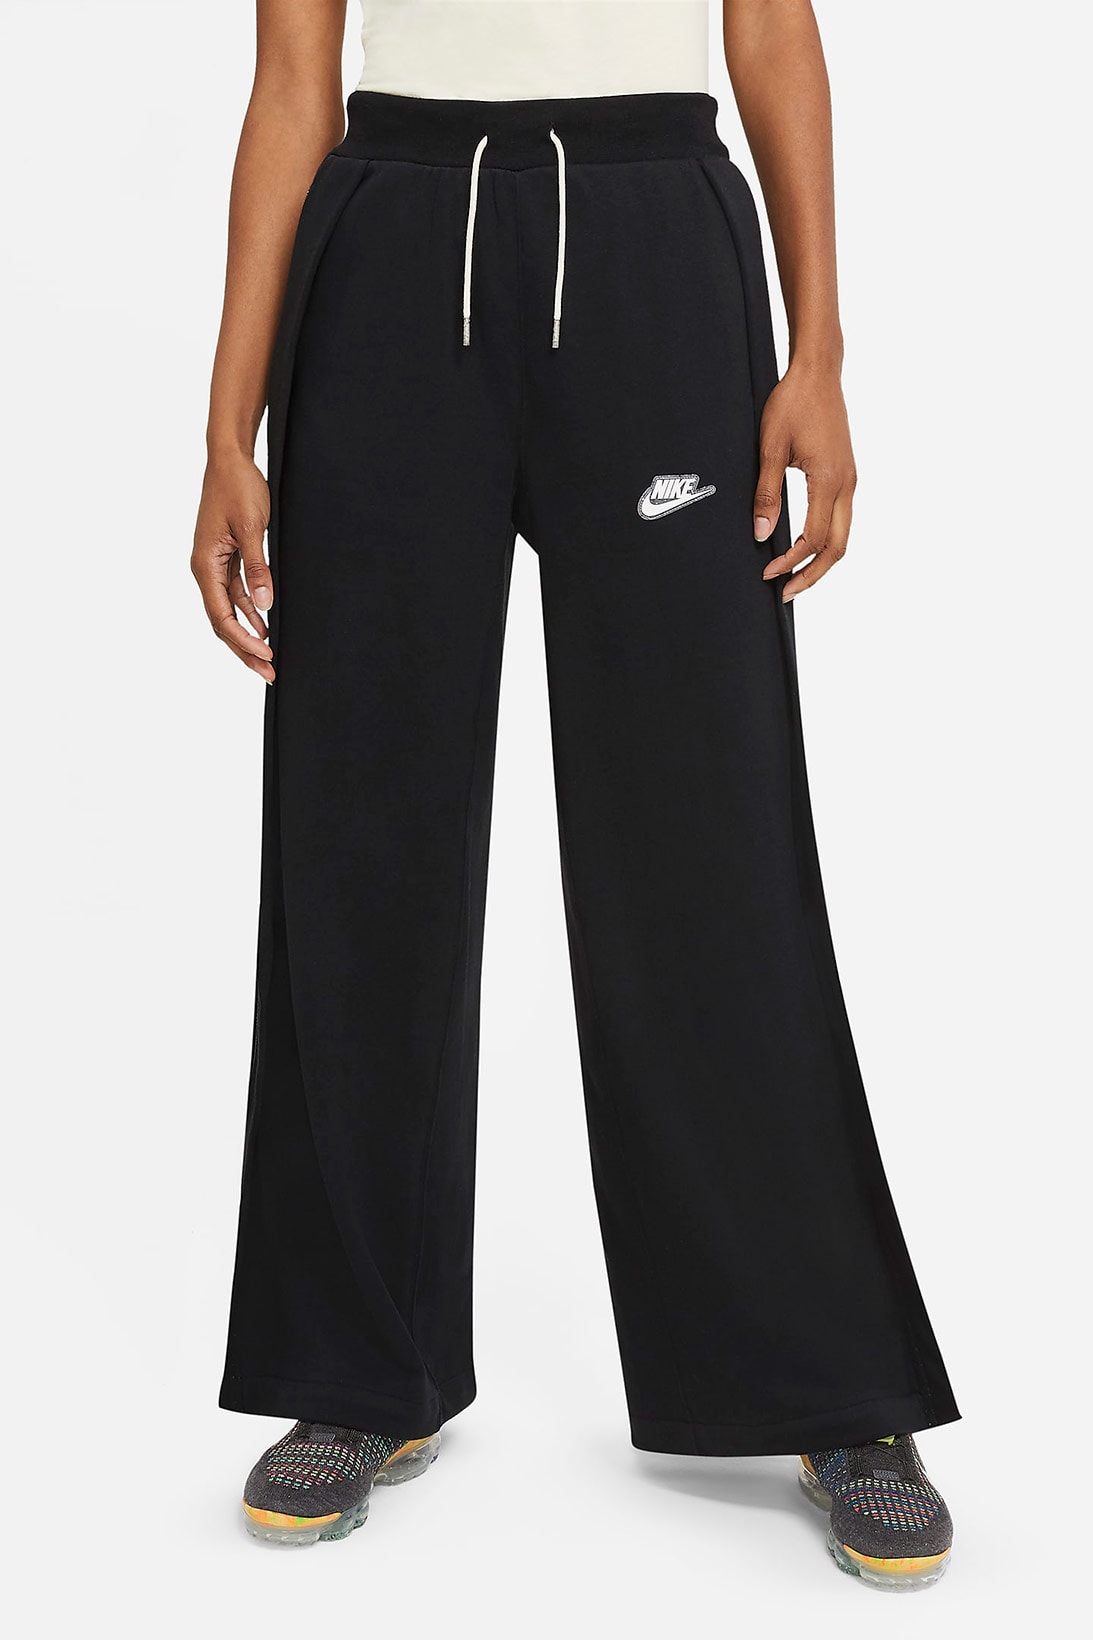 nike sportswear womens french terry trousers wide leg sweatpants sustainable black front